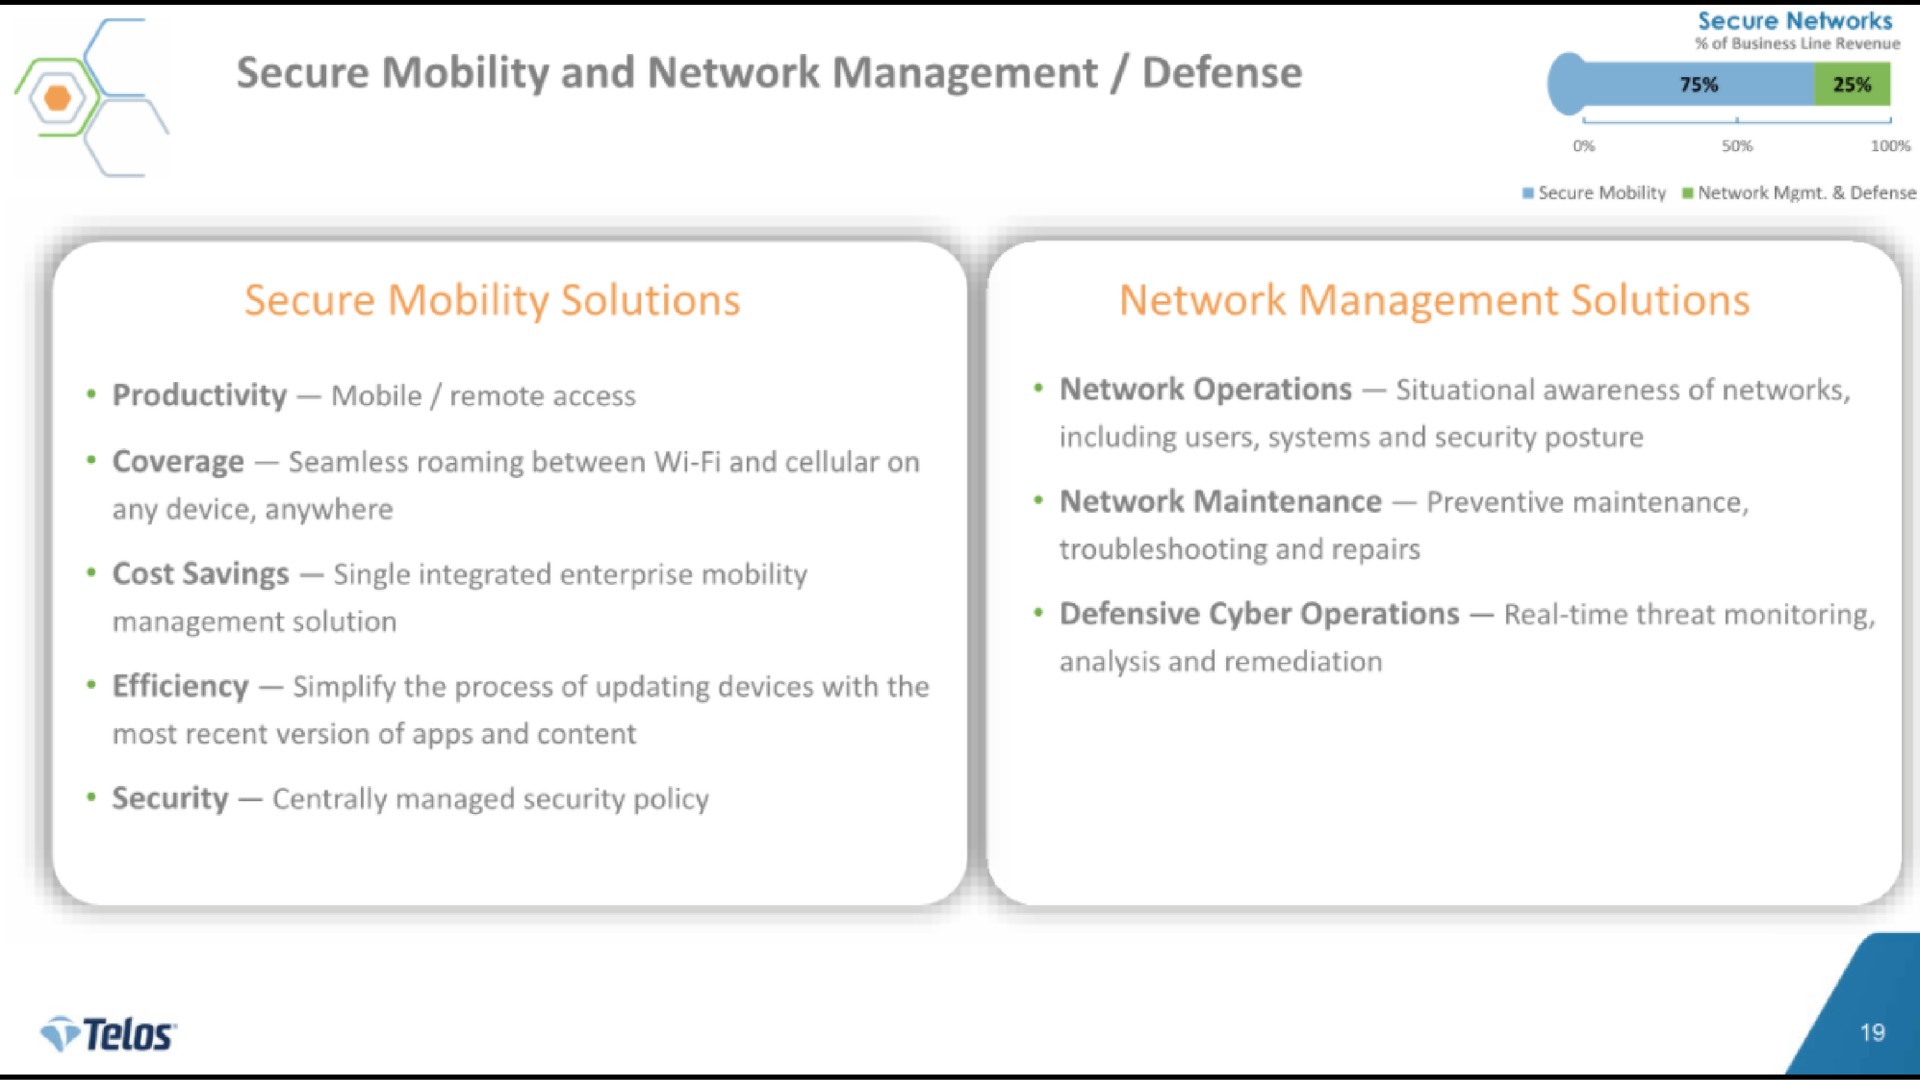 secure mobility and network management defense secure mobility solutions network management solutions | Telos